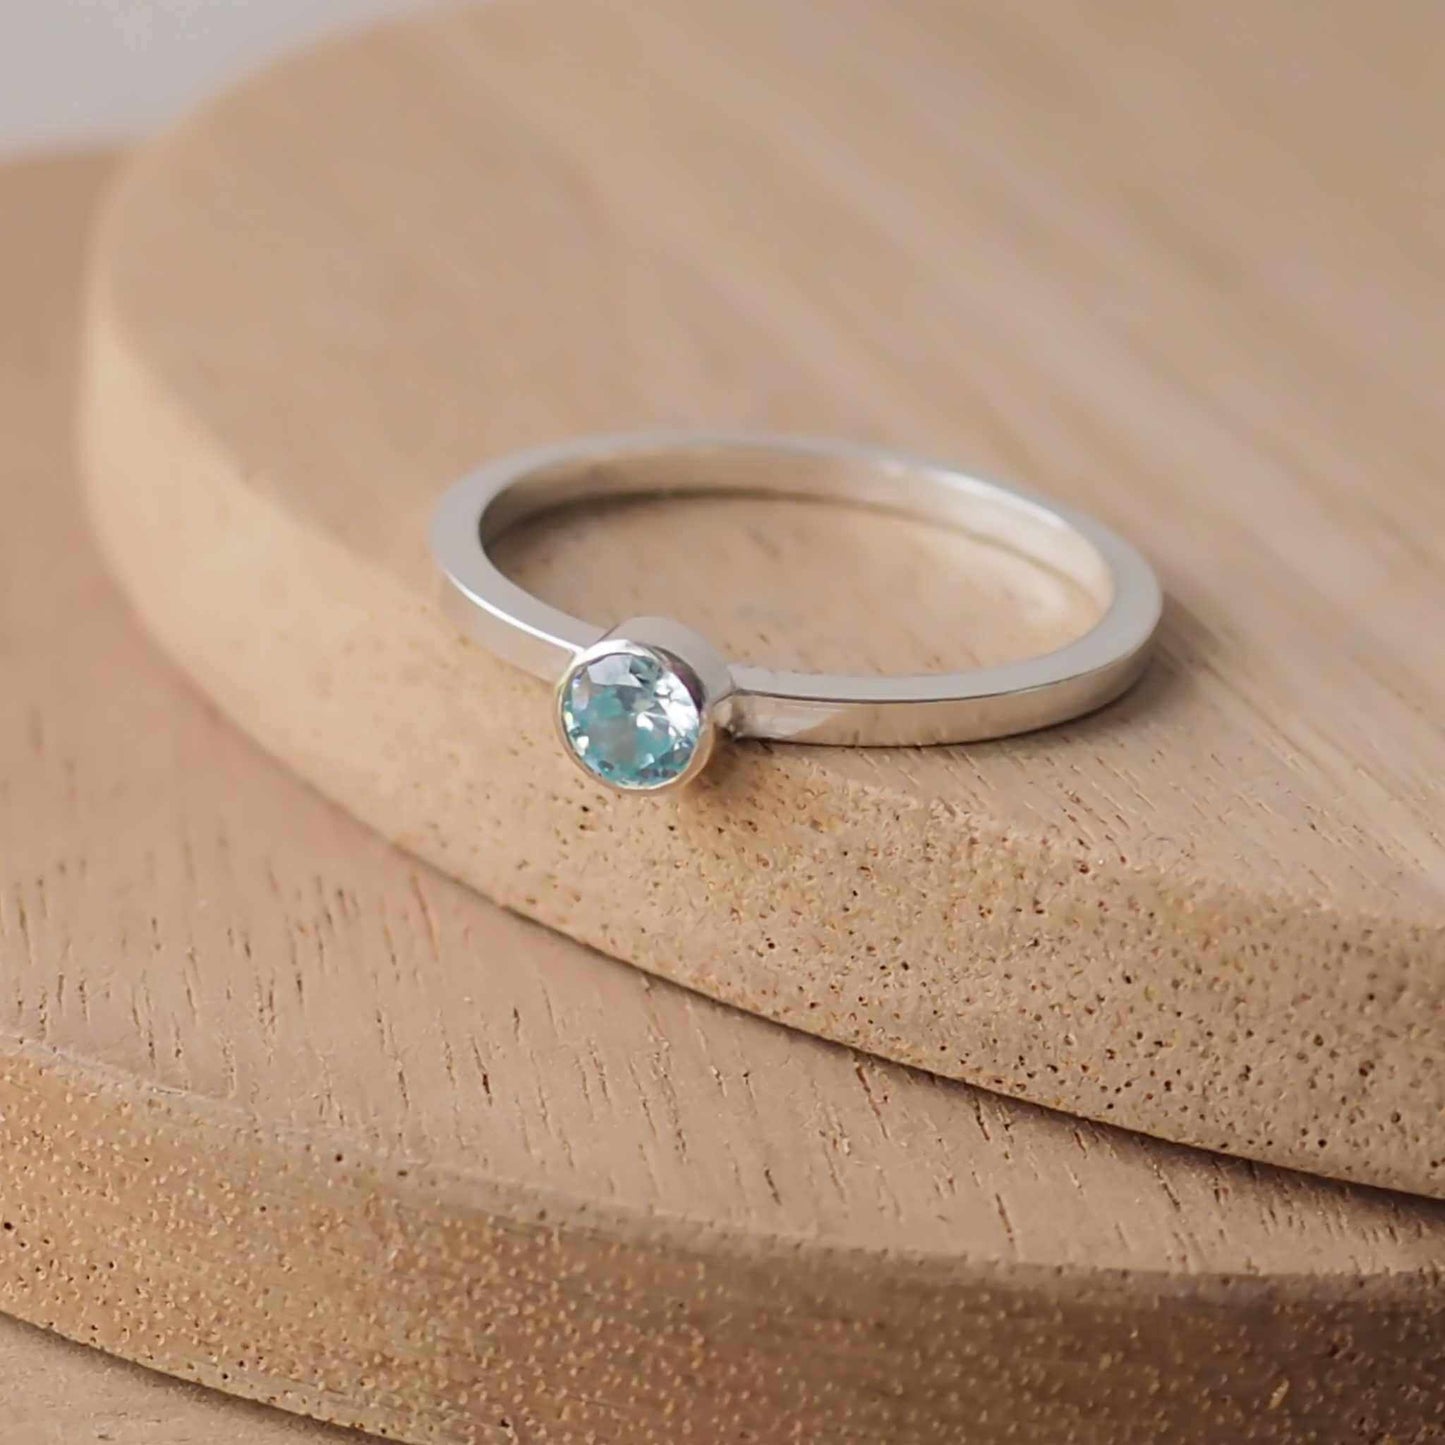 Silver ring with a light aqua gemstone. The ring is simple in style with no embellishment , with a square wire band 1.5mm thick with a simple Pale Blue Aquamarine 4mm round cubic zirconia stone set in an enclosed silver setting. Aquamarine is the birthstone for March. The ring is Sterling Silver and made to your ring size. Handmade in Scotland by Maram Jewellery